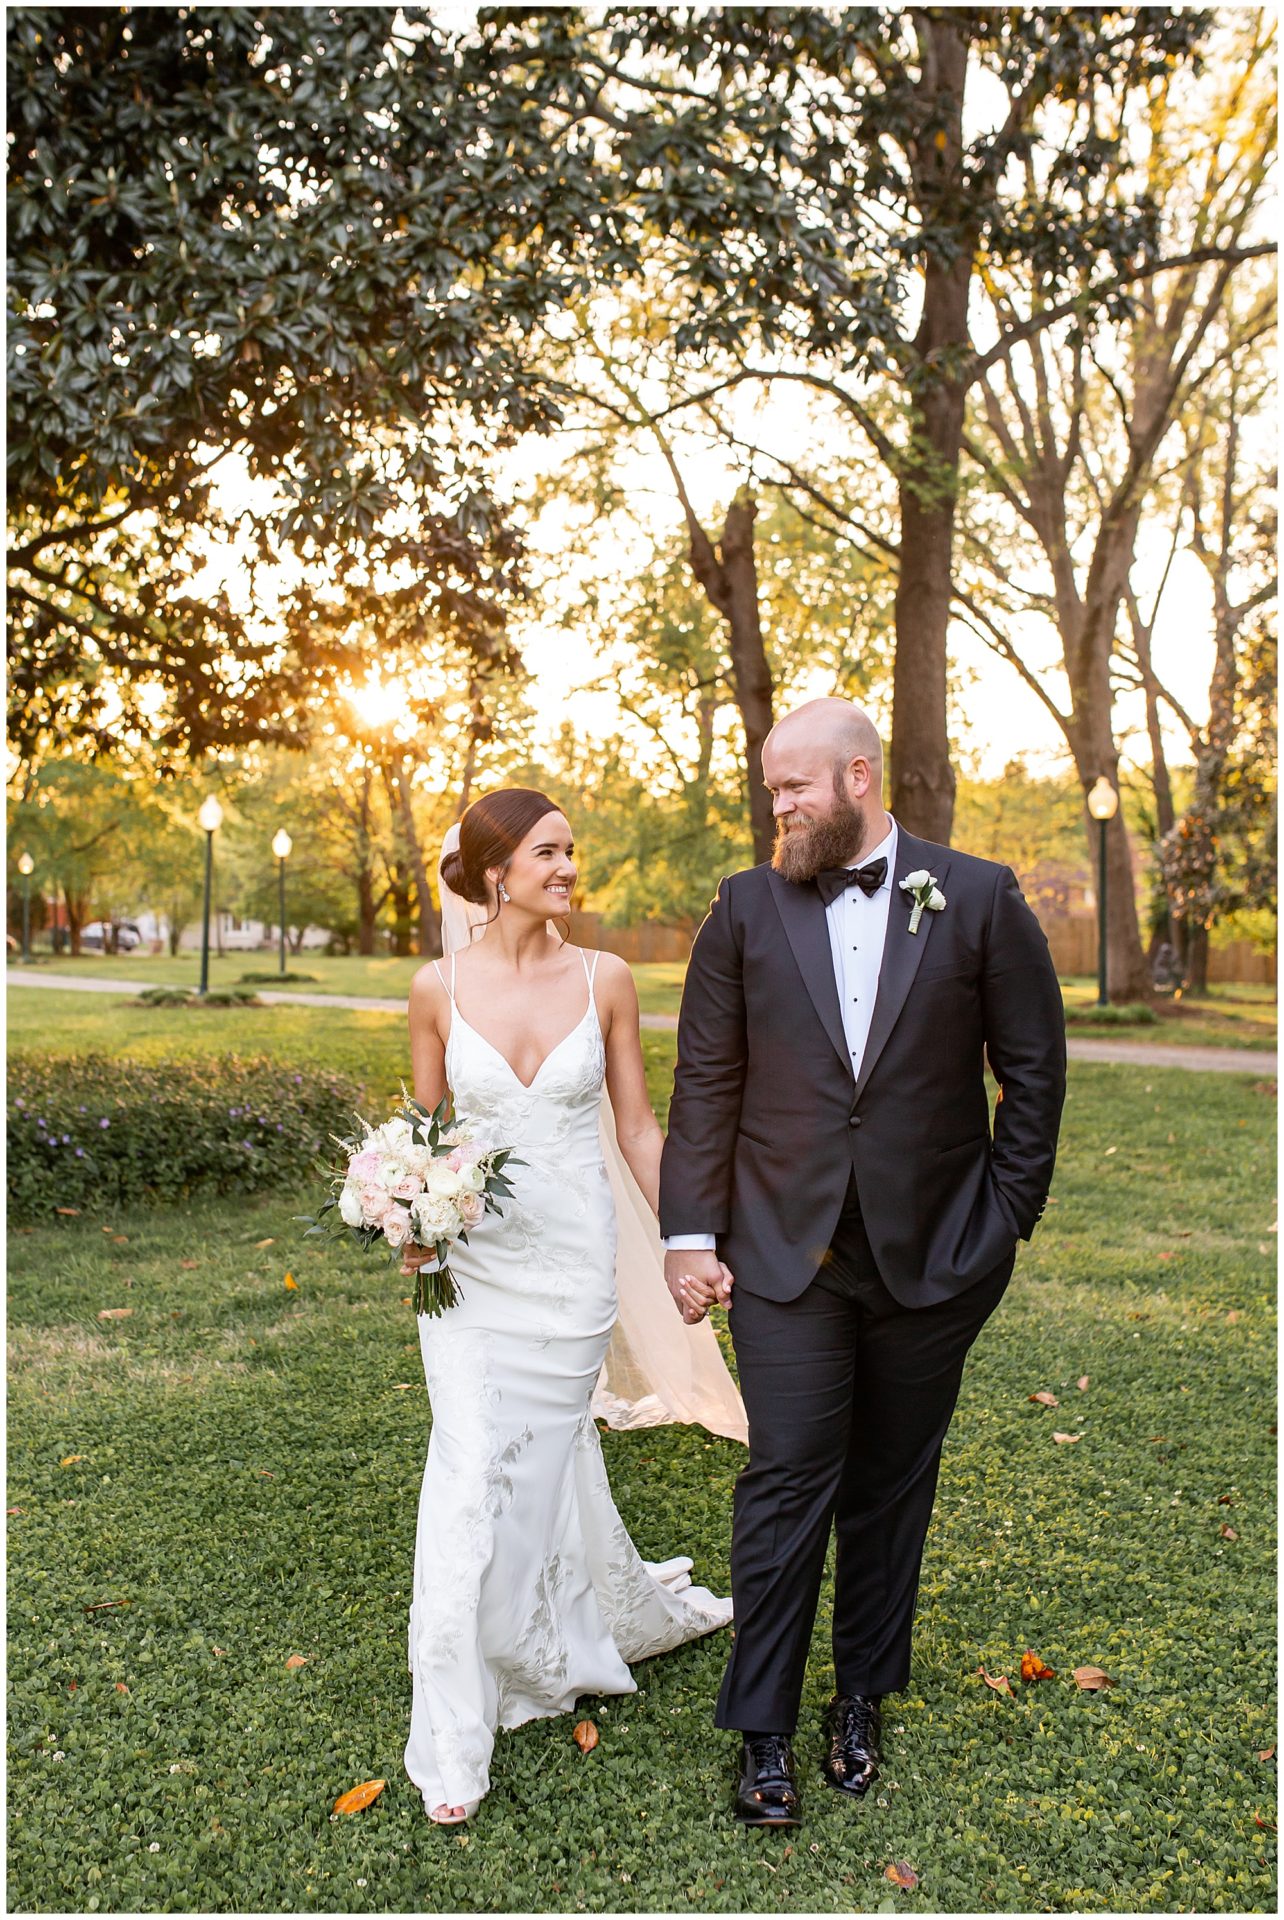 The most stunning bride and groom portraits at sunset at Riverwood Mansion by top wedding photographer, Melanie Dunn